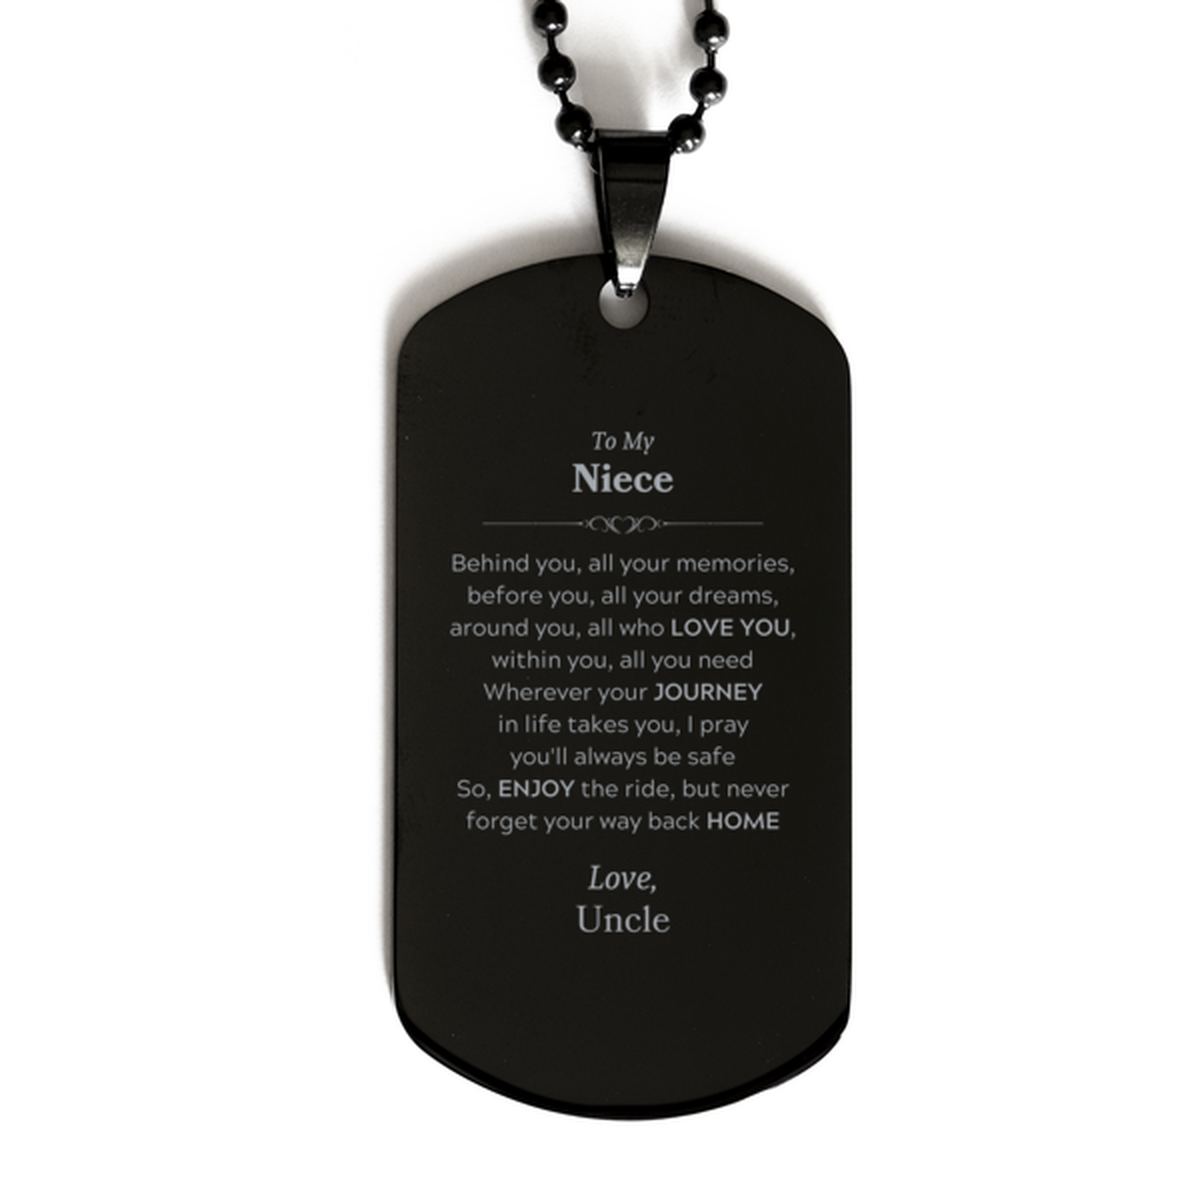 To My Niece Graduation Gifts from Uncle, Niece Black Dog Tag Christmas Birthday Gifts for Niece Behind you, all your memories, before you, all your dreams. Love, Uncle